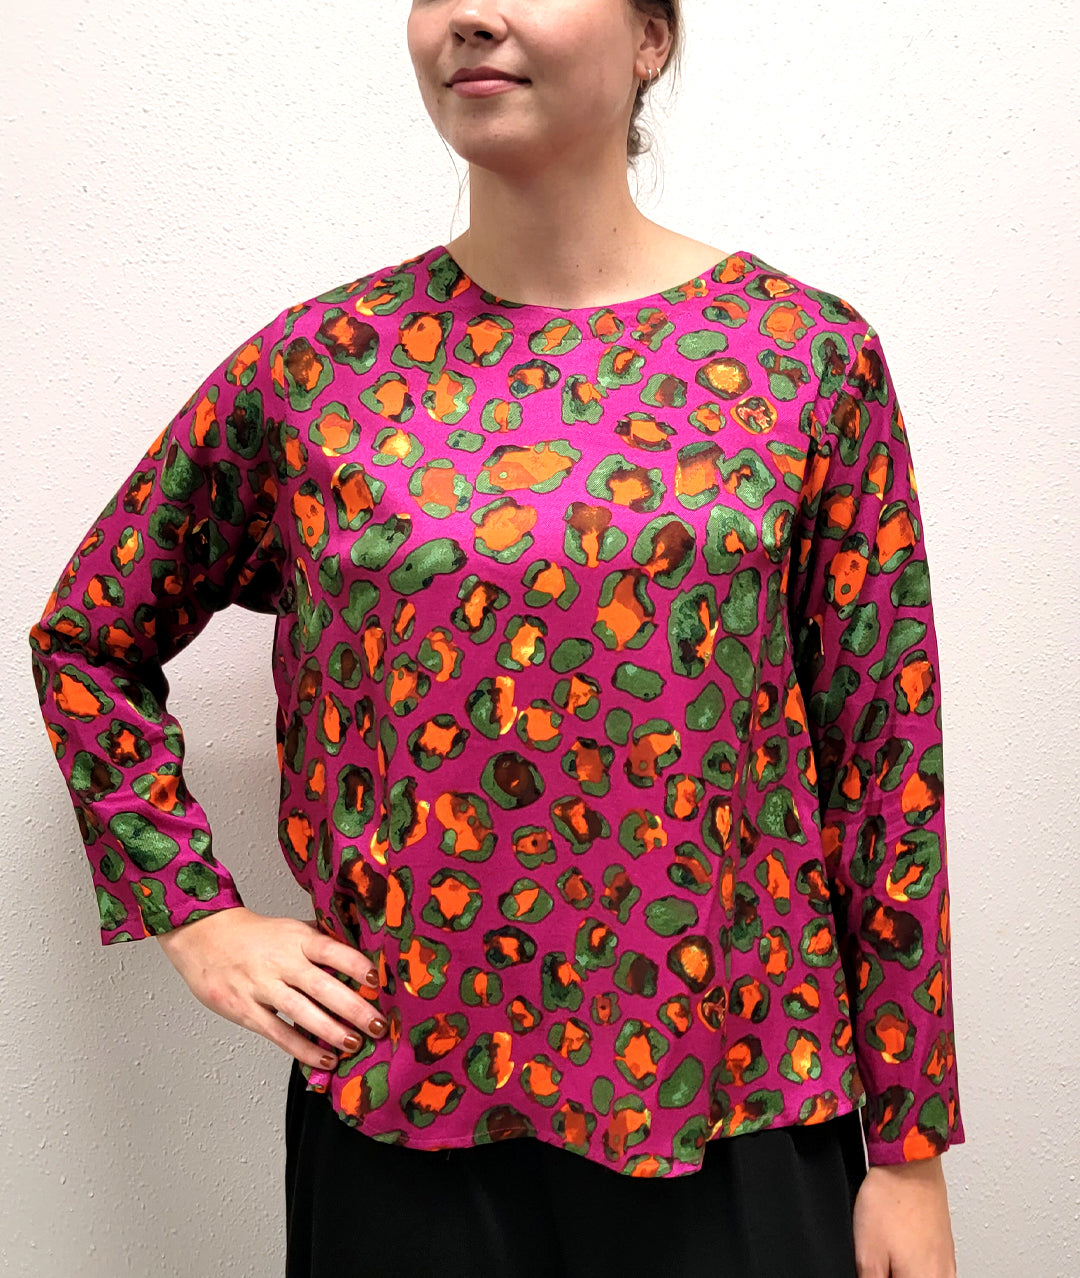 model is wearing brightly colored animal print shirt